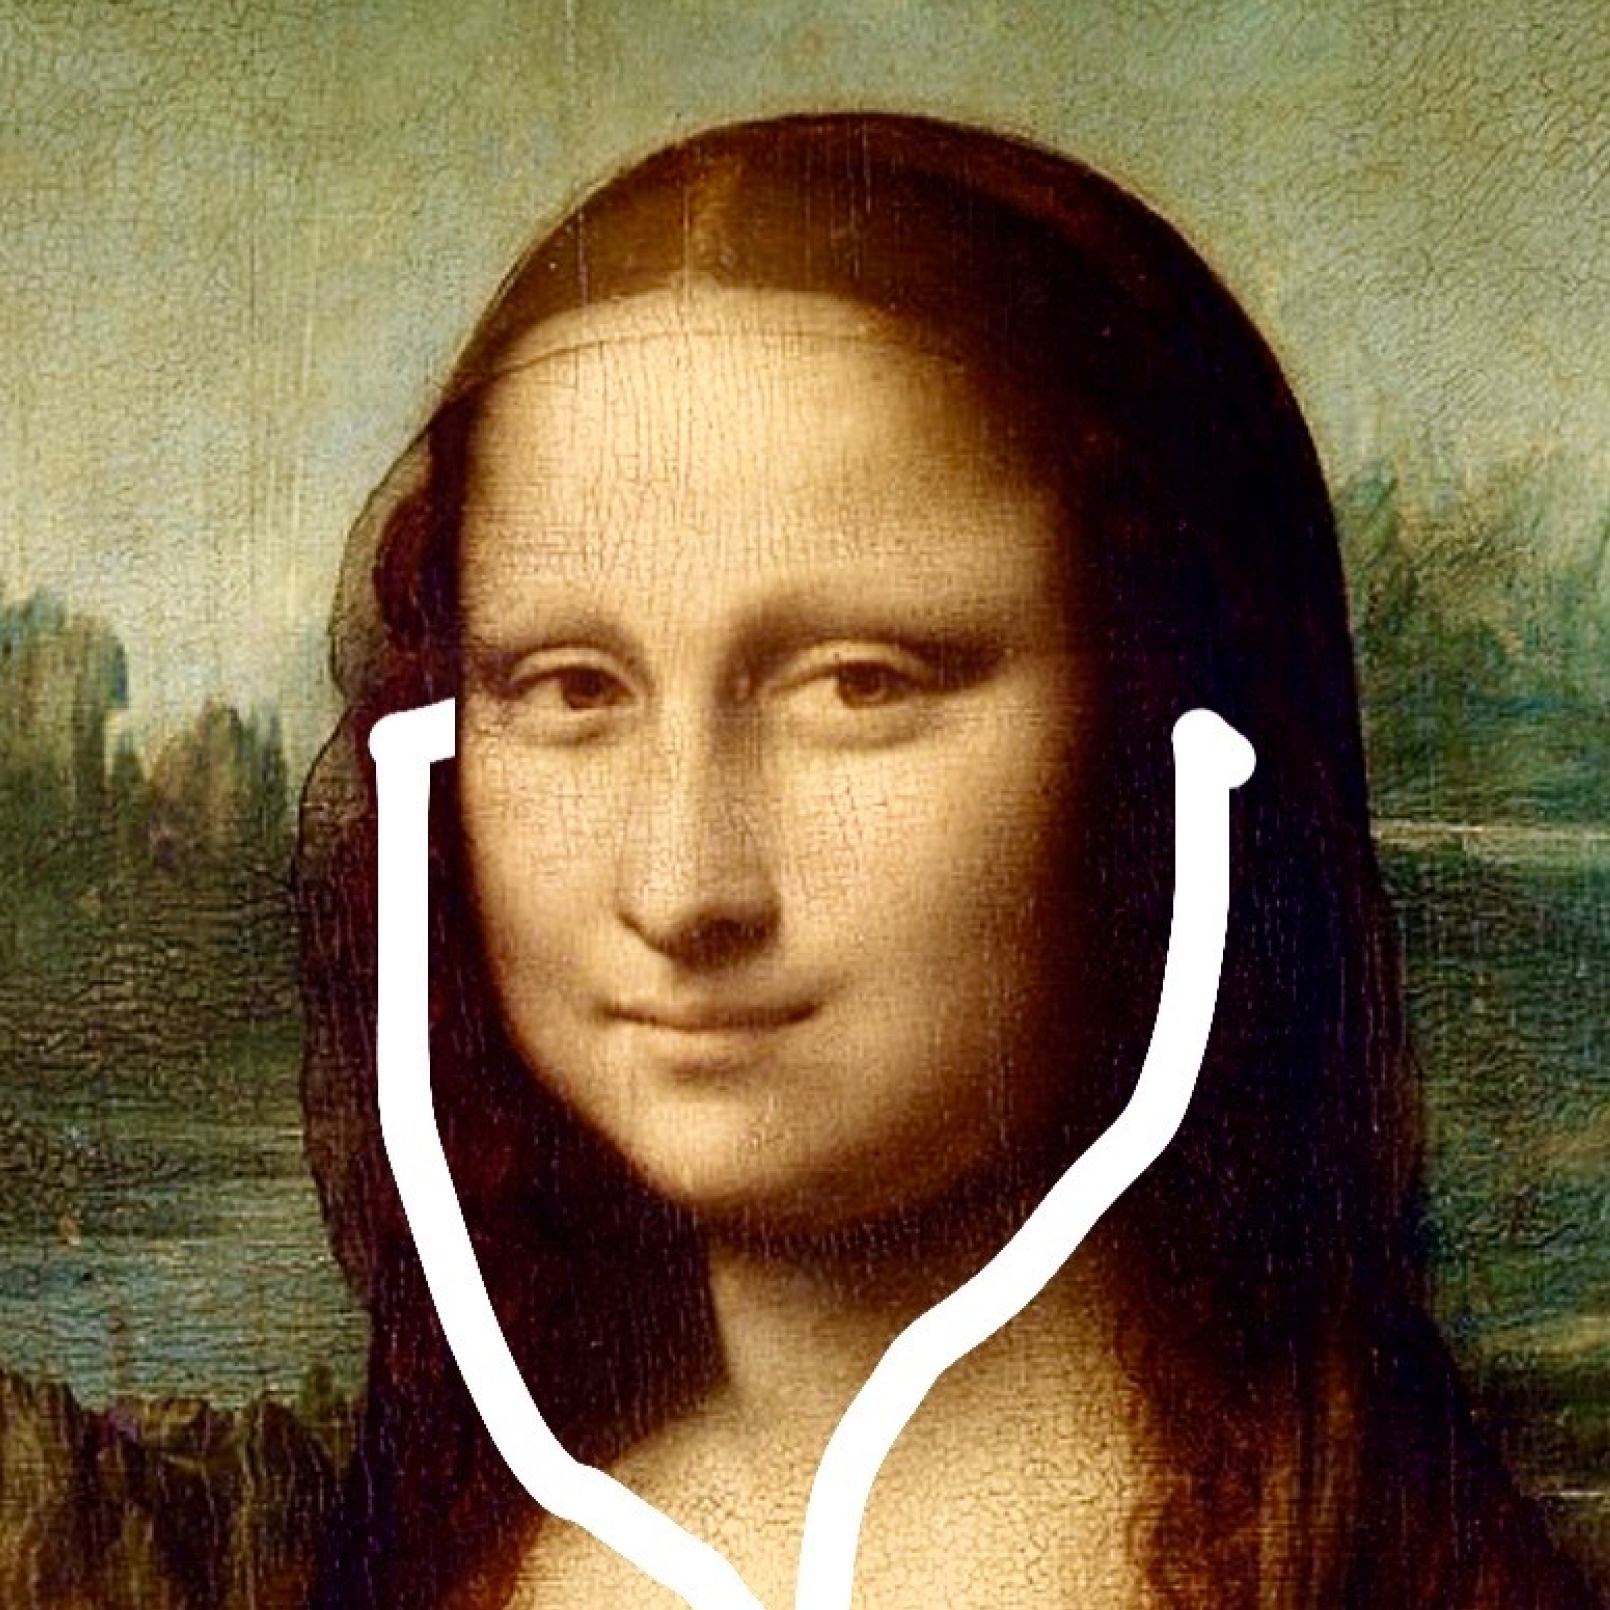 TLDL app icon Mona Lisa with MS Paint headphones painted on her enigmatic smile